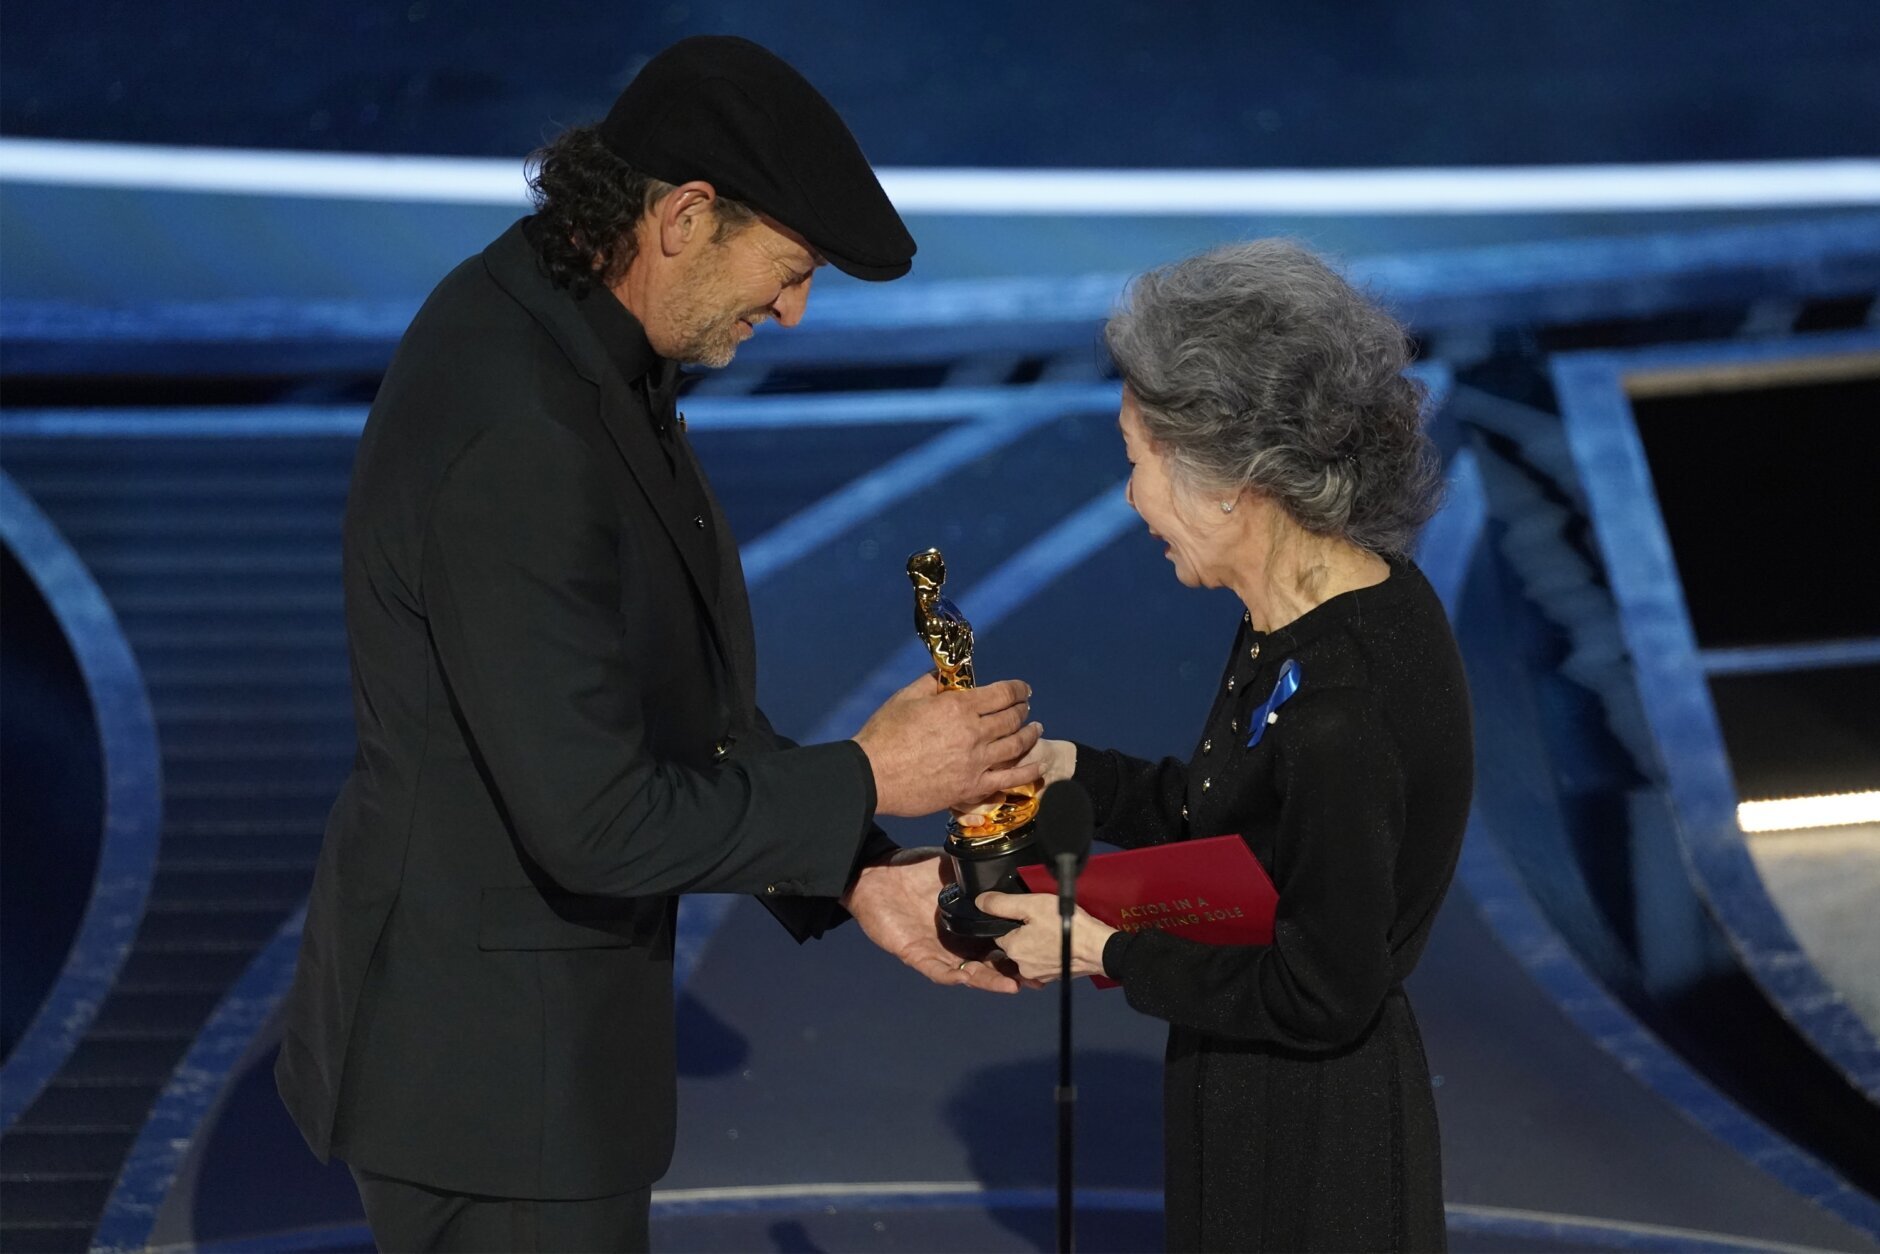 File:Al Pacino presenting Best Performance, The Game Awards 2022